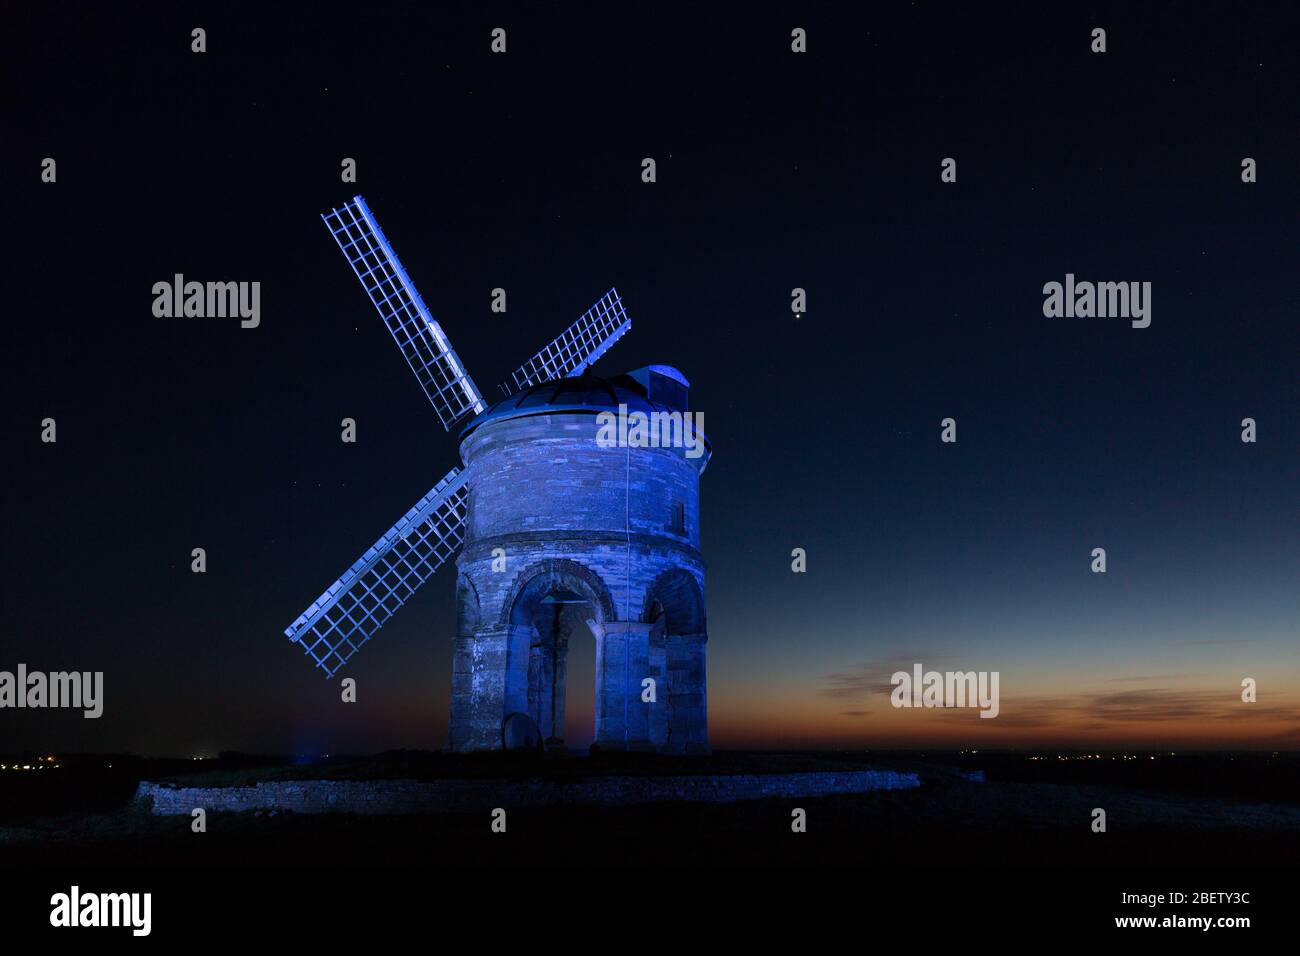 Chesterton, Warwickshire, UK. 15th Apr, 2020. The 17th century Grade 1 listed windmill at Chesterton, near Leamington Spa, Warwickshire, is illuminated with blue light in support of the NHS and other key workers. Credit: Peter Lopeman/Alamy Live News Stock Photo